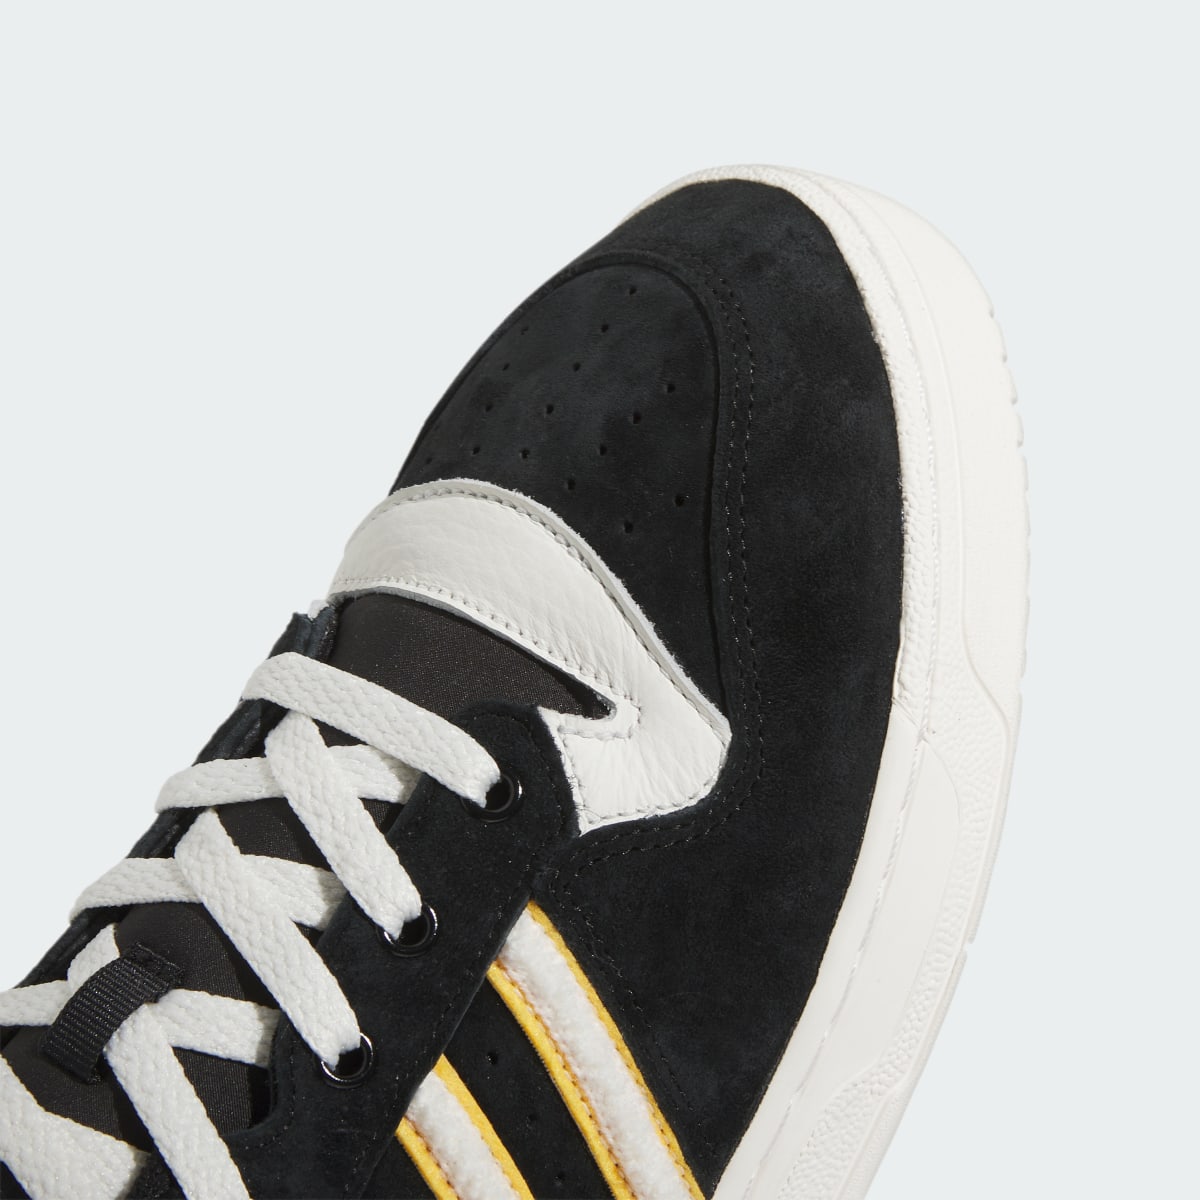 Adidas Grambling State Rivalry Low Shoes. 9